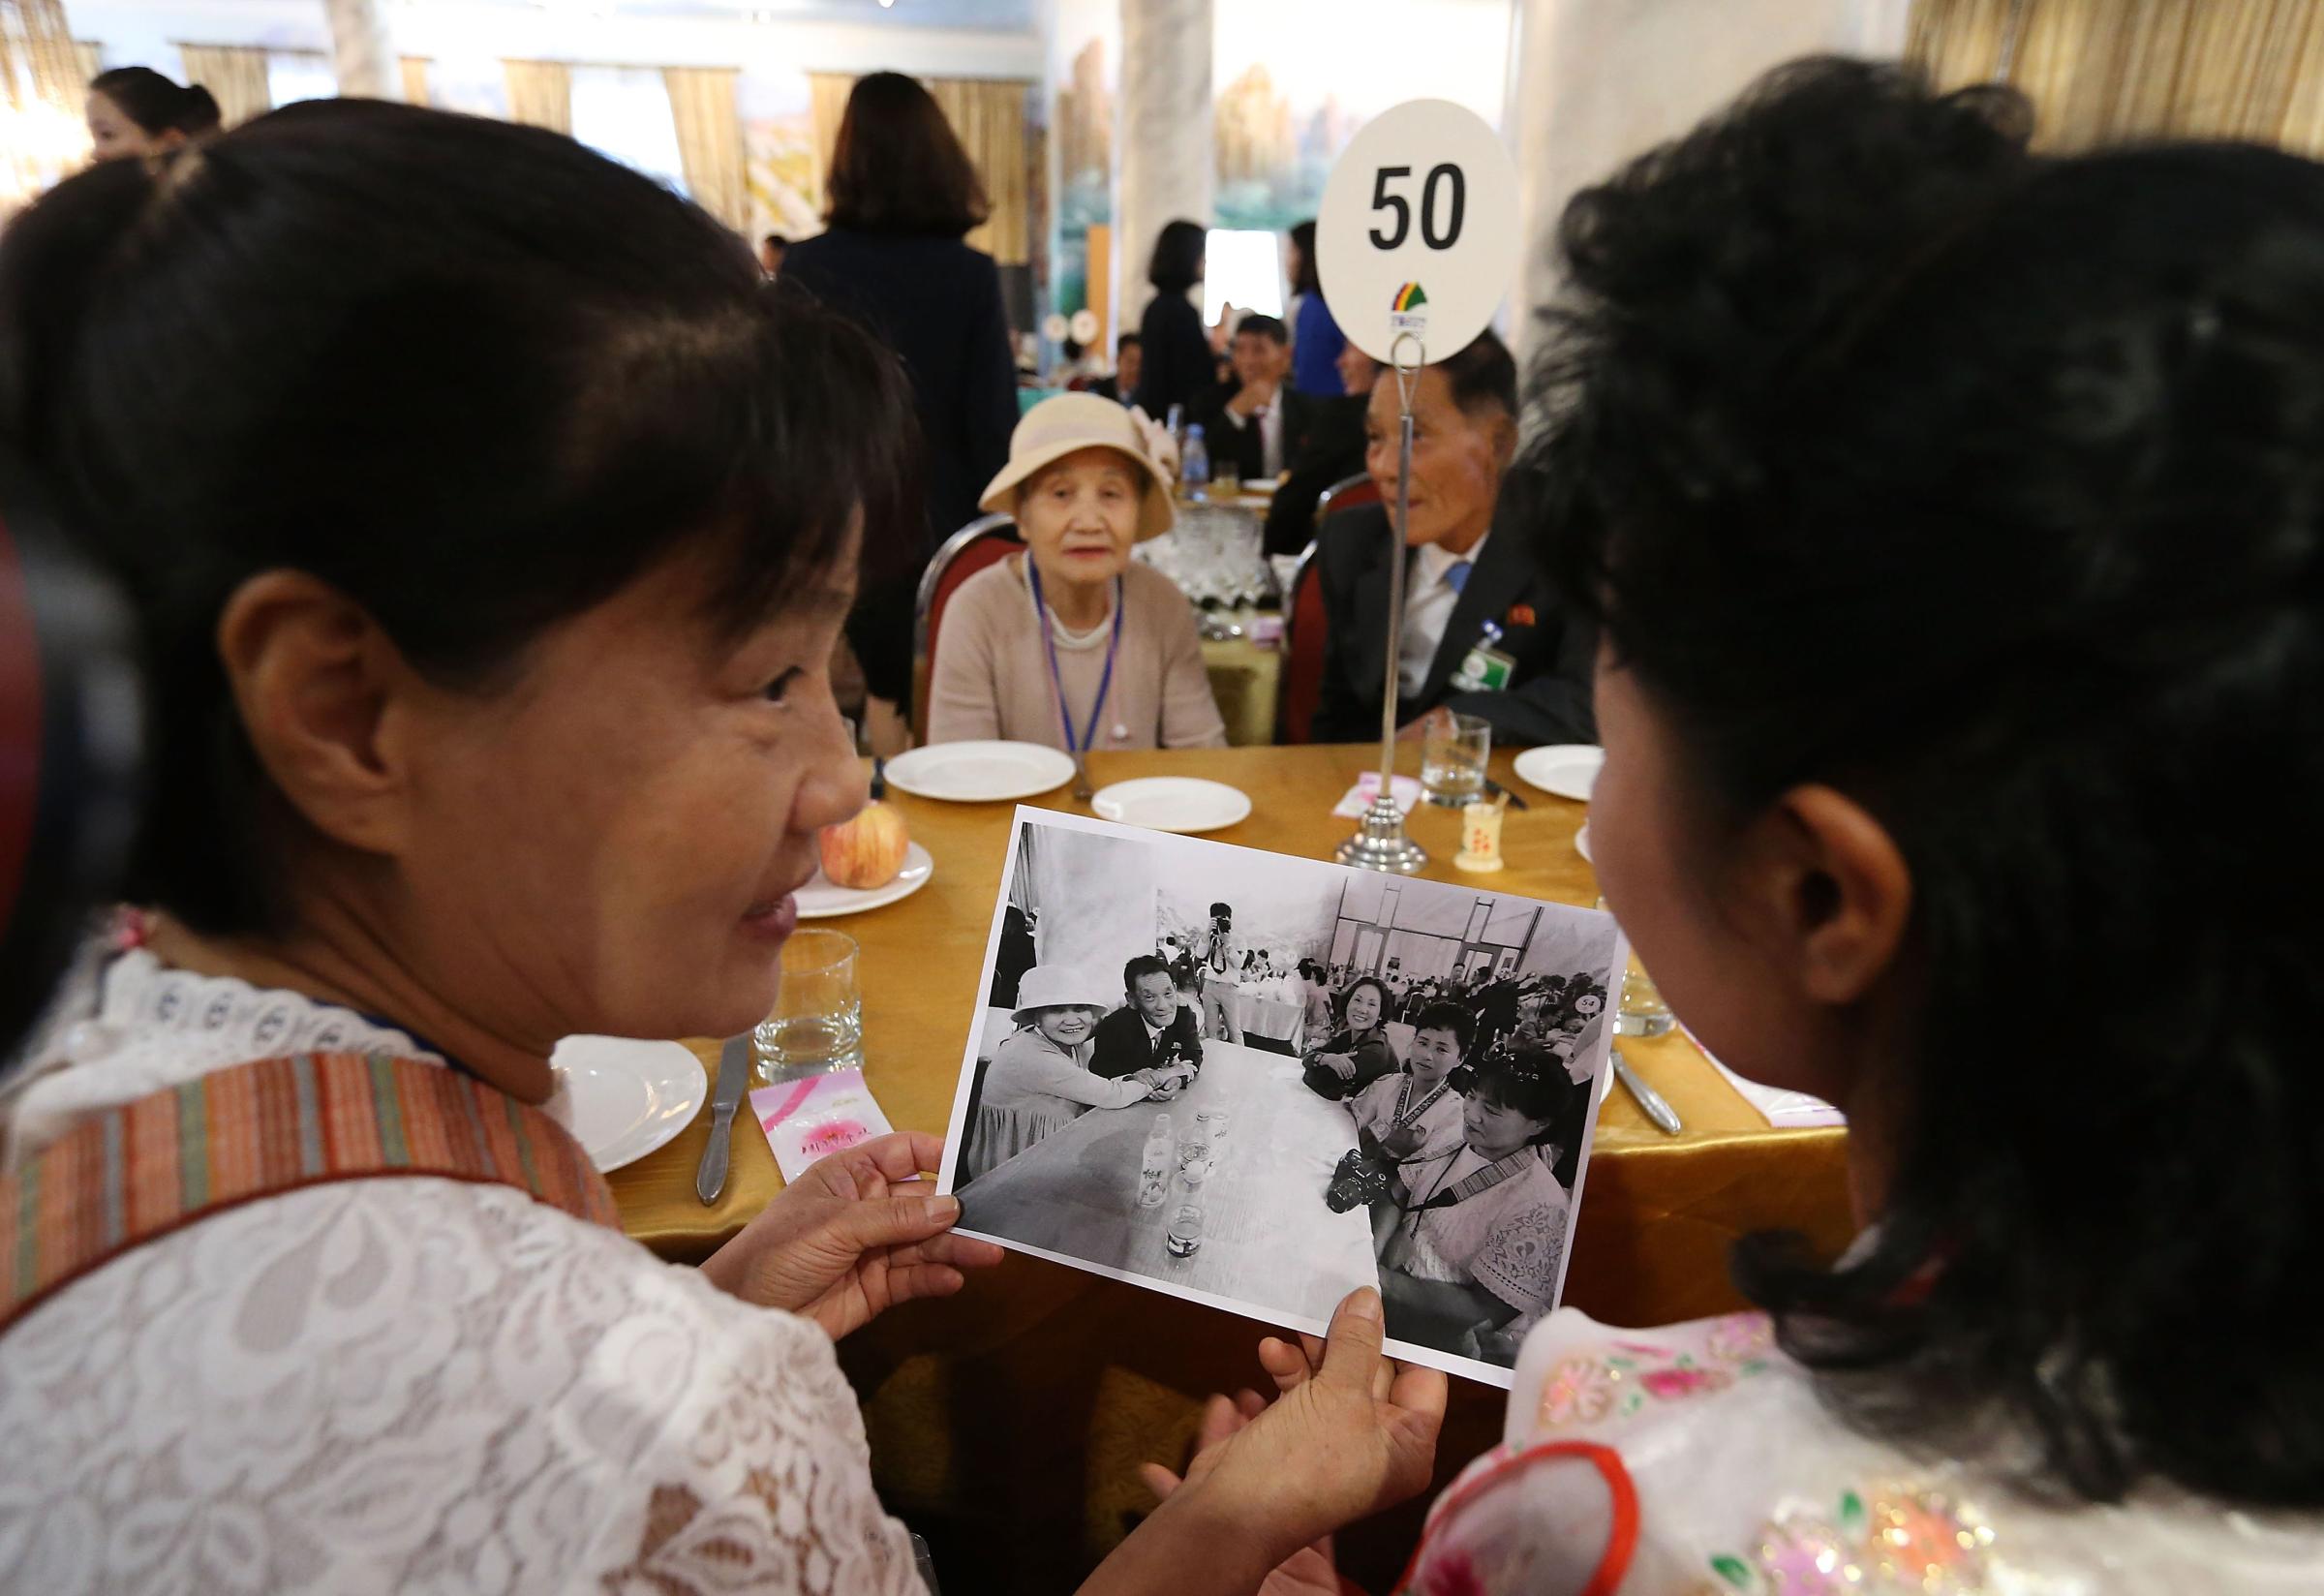 South and North Koreans Hold Family Reunion Decades Since The War